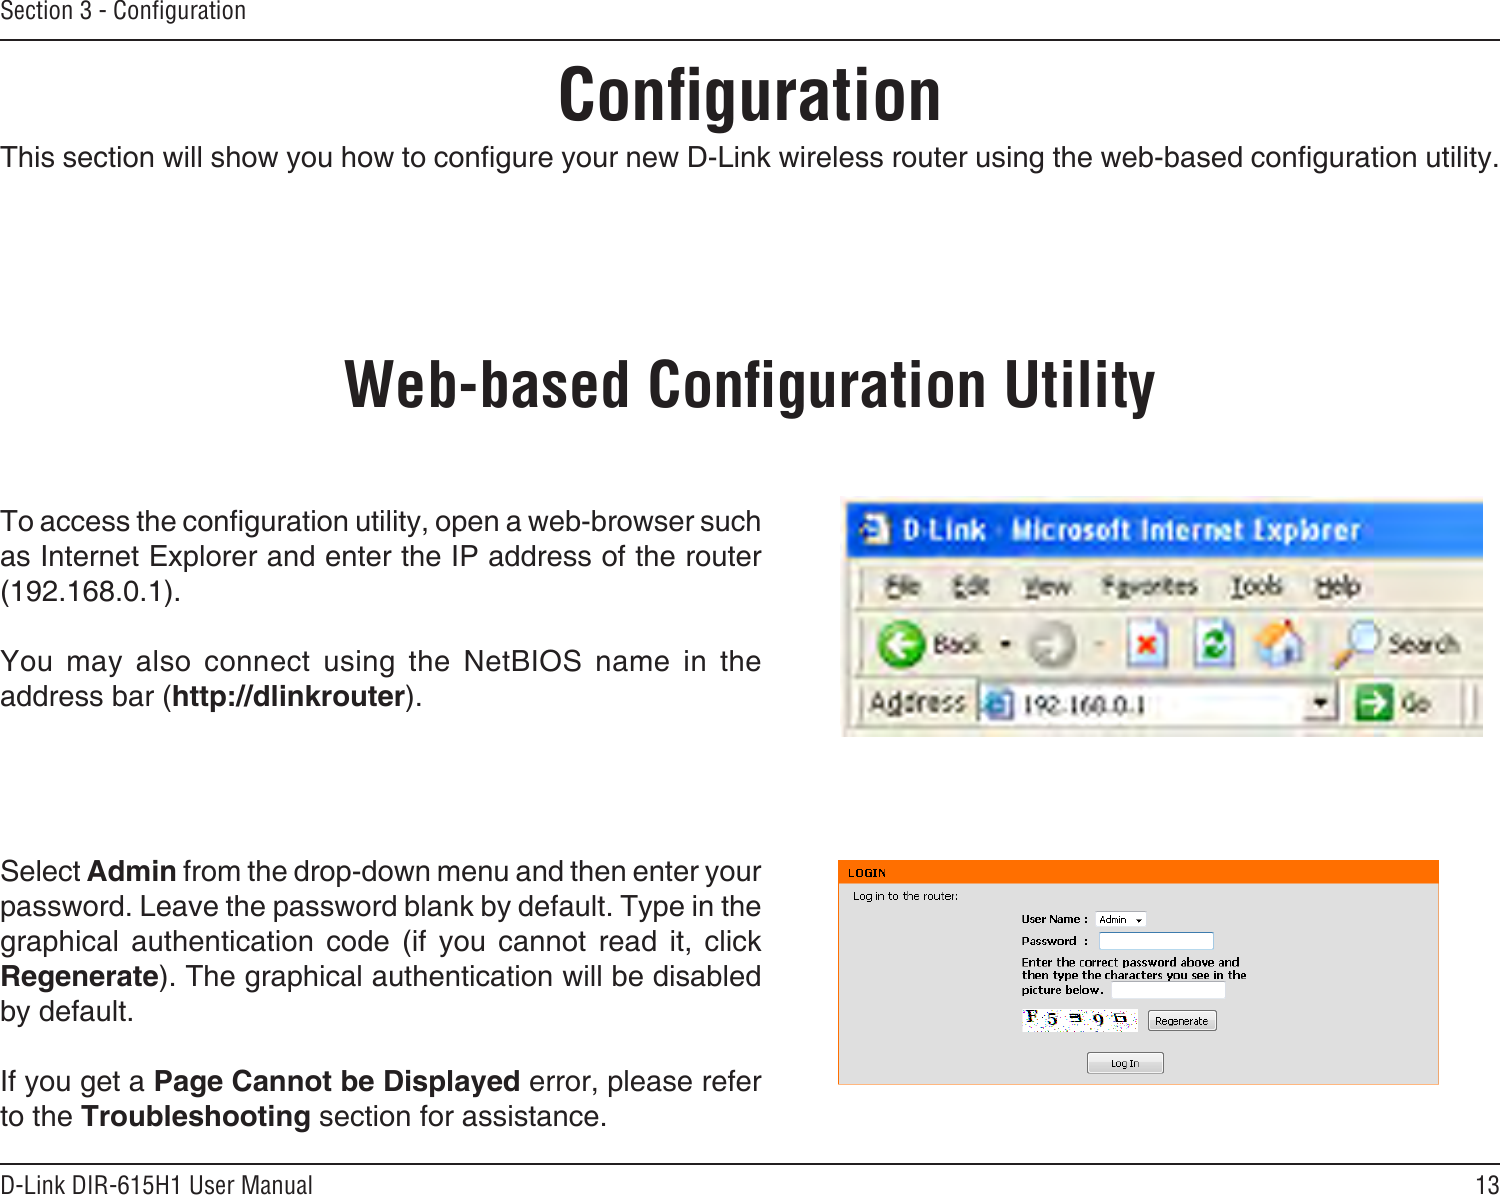 13D-Link DIR-615H1 User ManualSection 3 - CongurationCongurationThis section will show you how to congure your new D-Link wireless router using the web-based conguration utility.Web-based Conguration UtilityTo access the conguration utility, open a web-browser such as Internet Explorer and enter the IP address of the router (192.168.0.1).You  may  also  connect  using  the  NetBIOS  name  in  the address bar (http://dlinkrouter).Select Admin from the drop-down menu and then enter your password. Leave the password blank by default. Type in the graphical  authentication  code  (if  you  cannot  read  it,  click Regenerate). The graphical authentication will be disabled by default.If you get a Page Cannot be Displayed error, please refer to the Troubleshooting section for assistance.